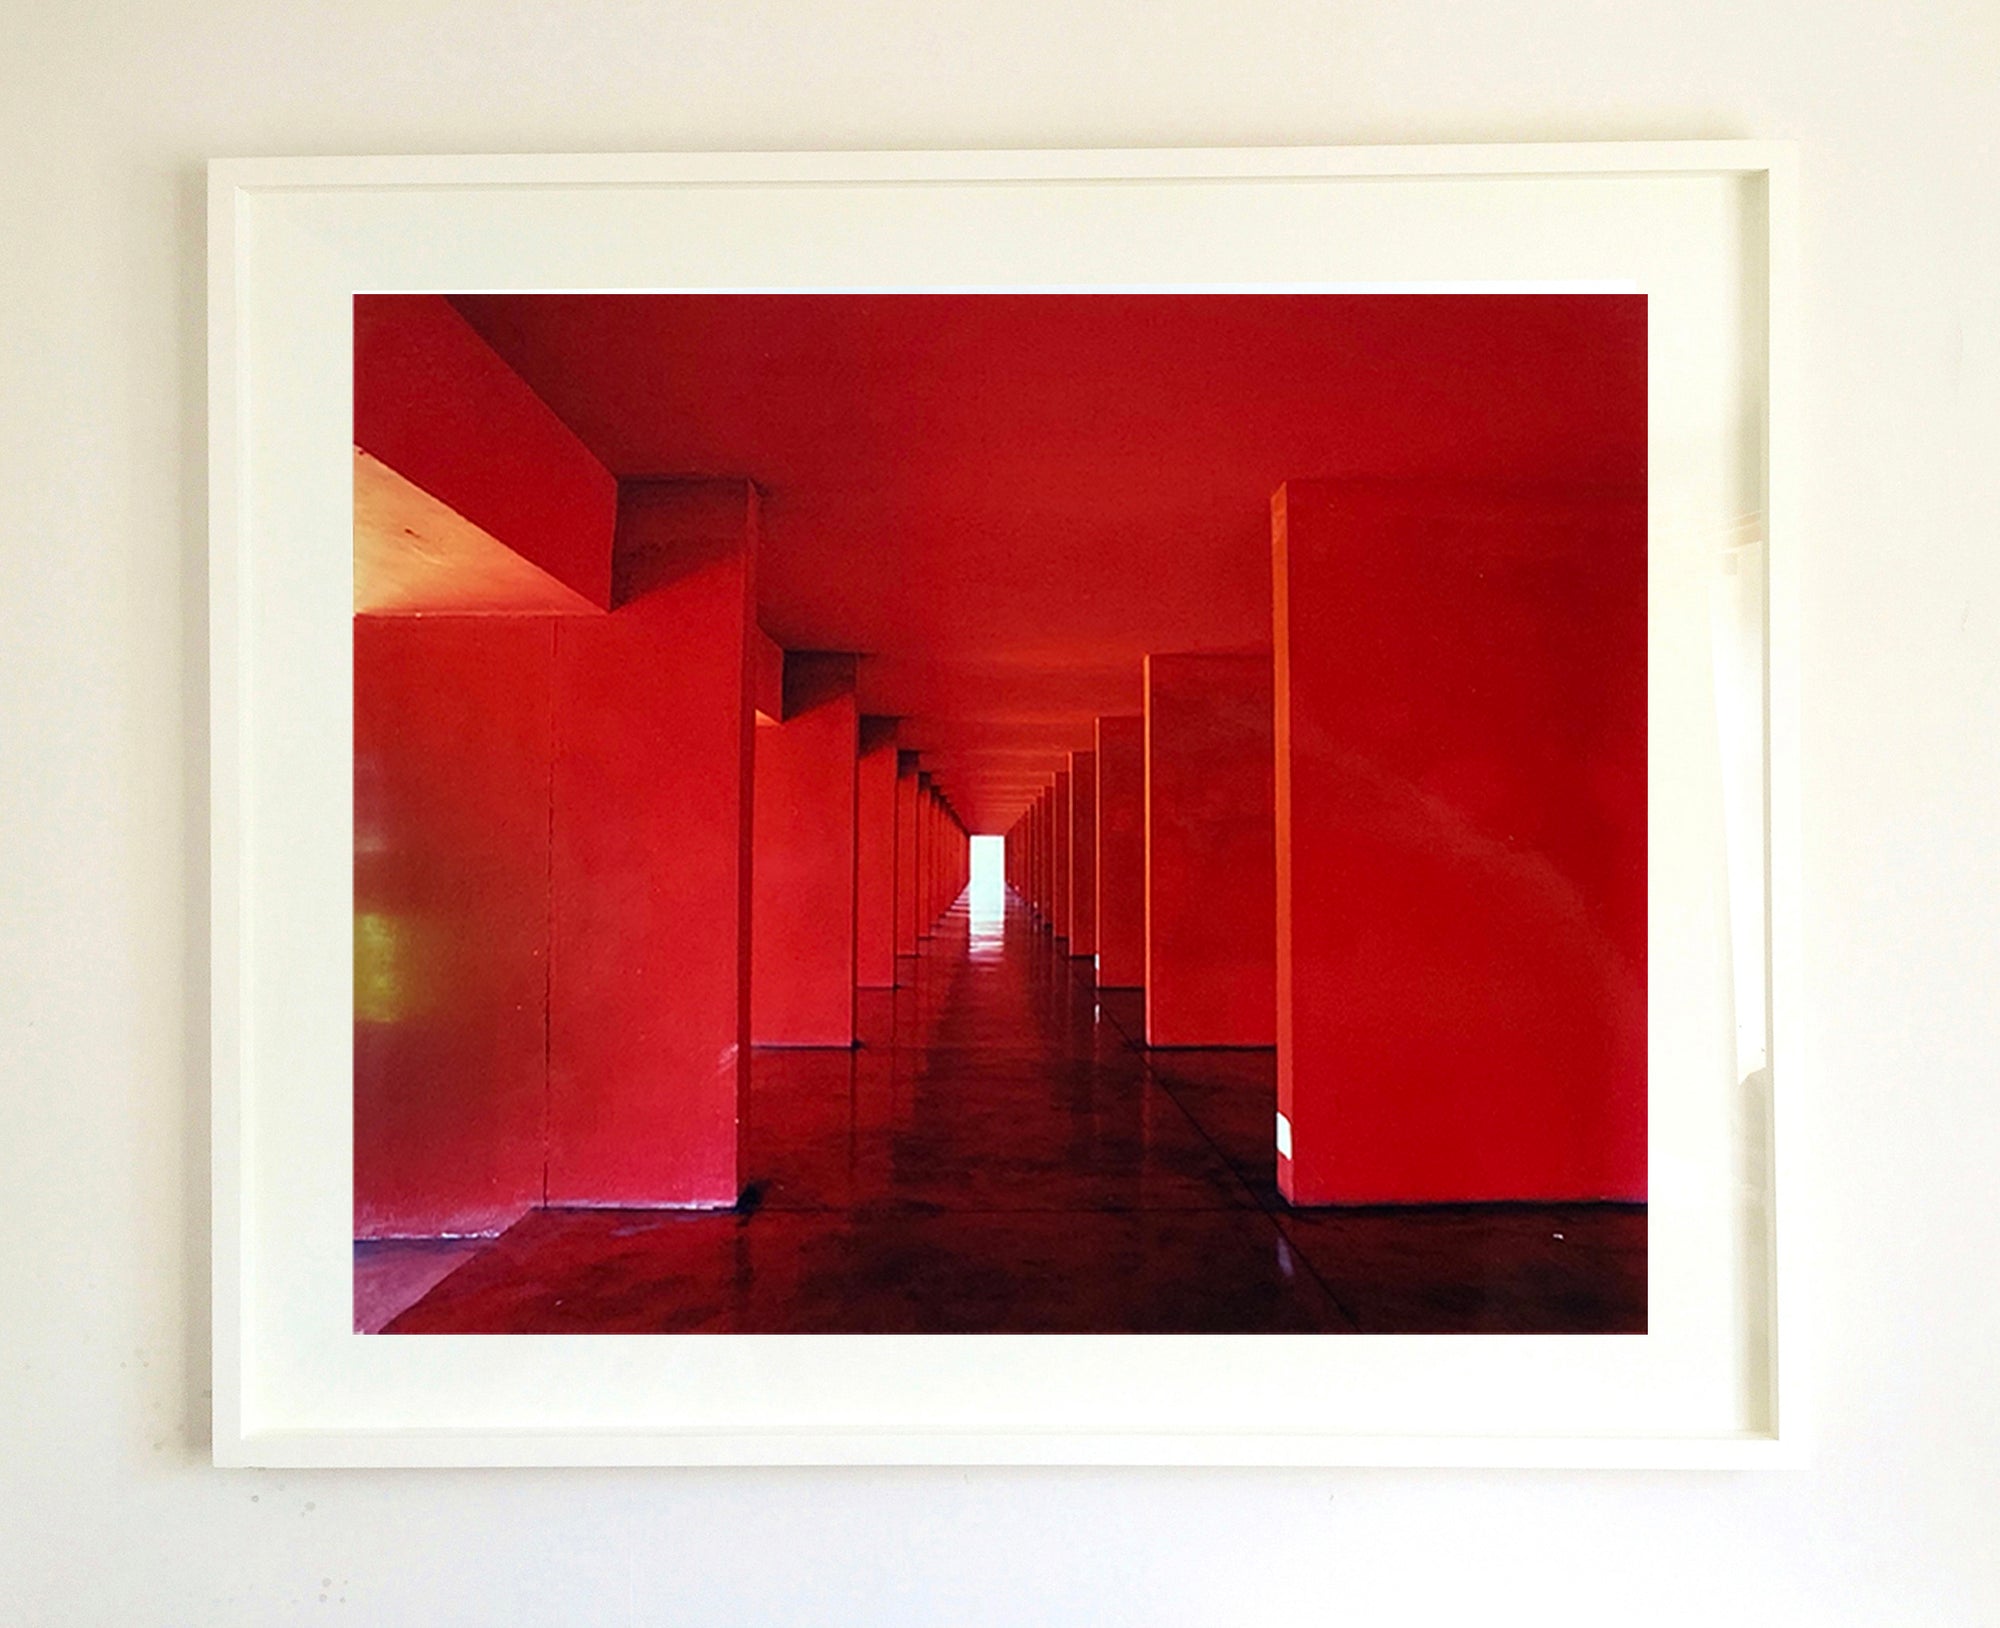 From Richard Heeps photography series 'A Short History of Milan'. Red Dinosaur III captures Italian design and architecture.